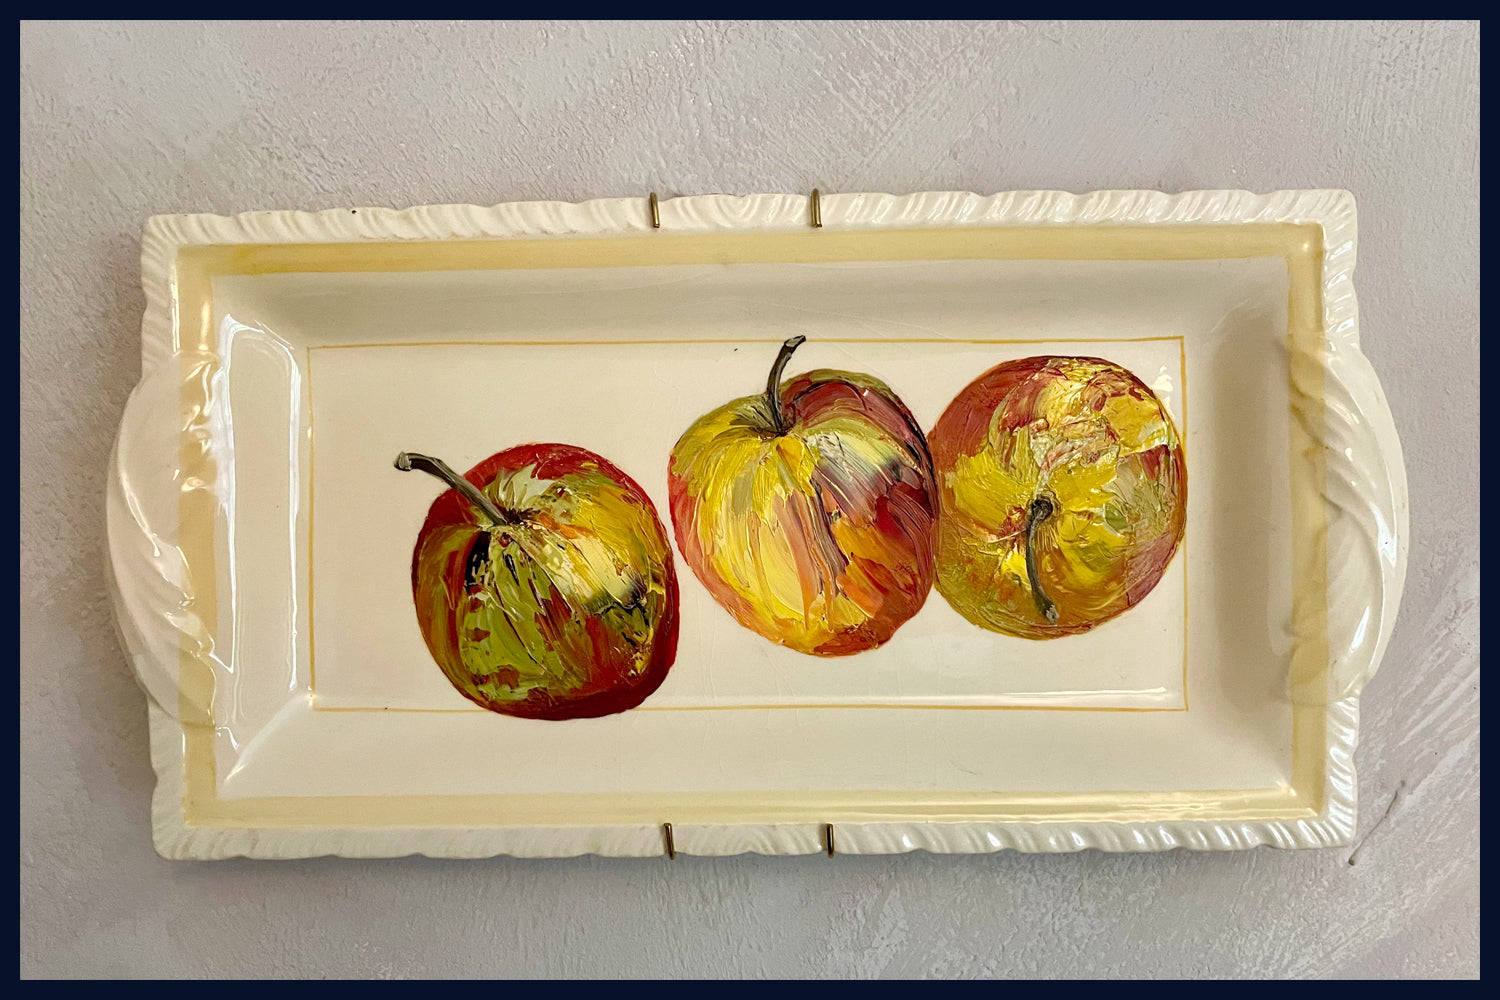 Plated: original fine art oil painting on a 1930s sandwich plate - 3 apples